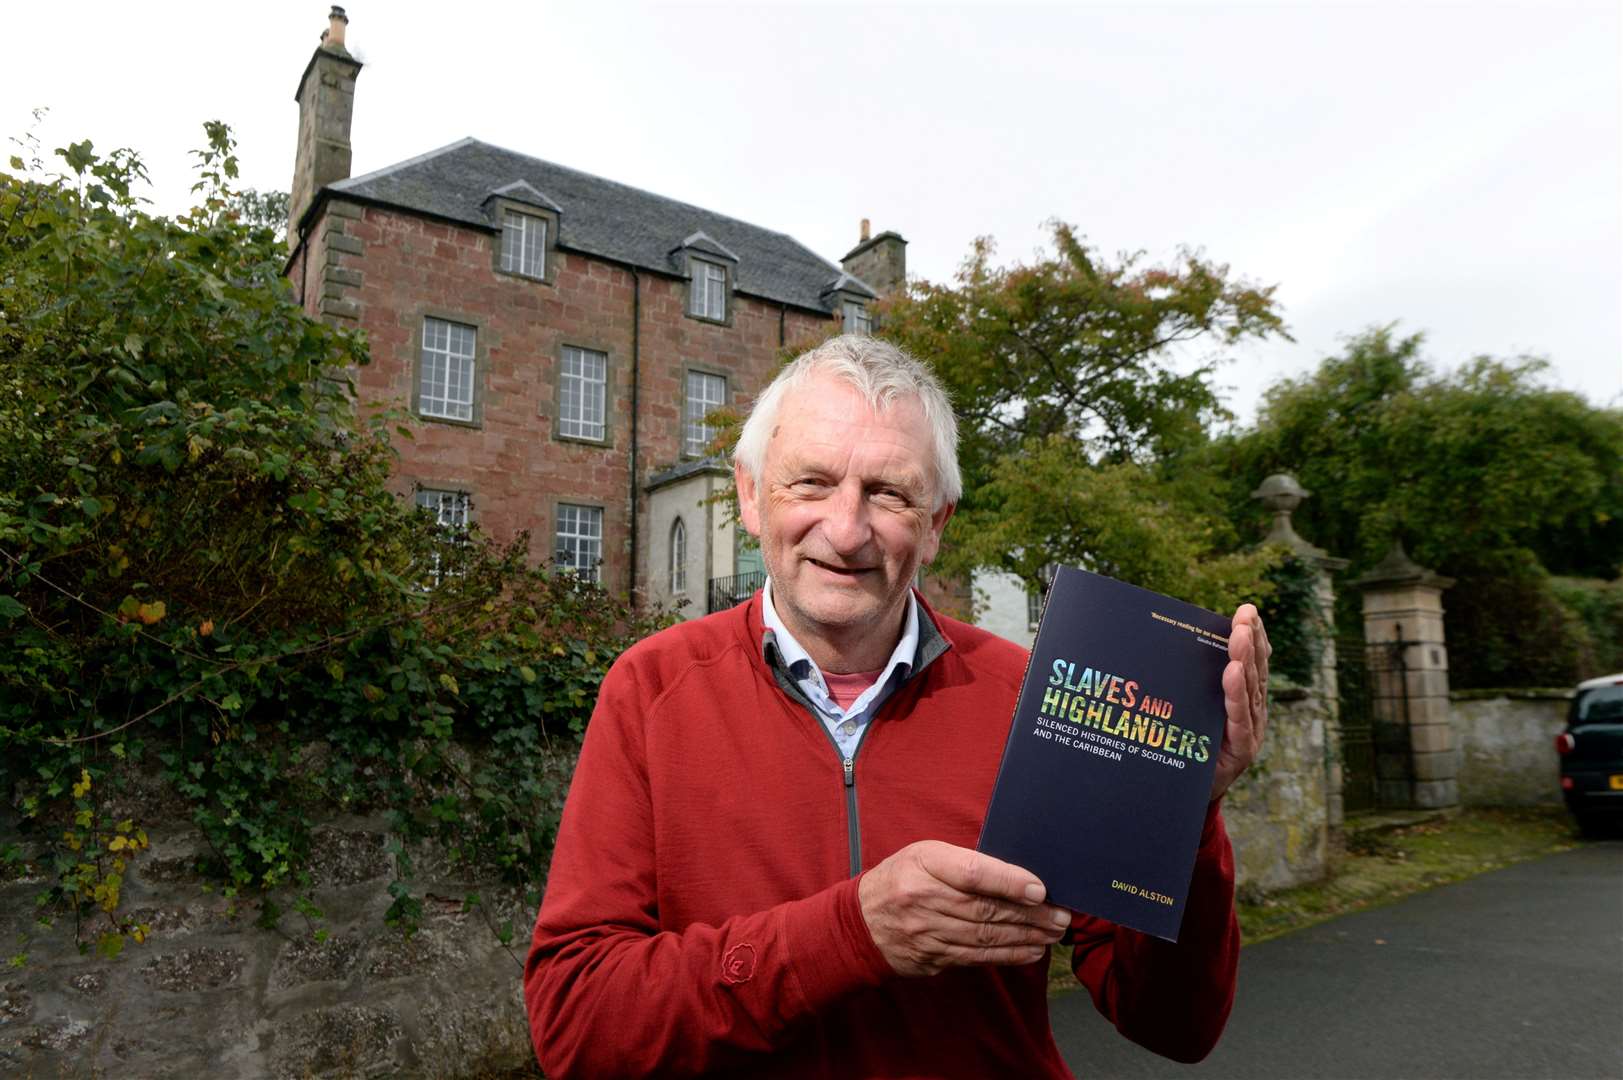 Author David Alston outside Belle View House in Cromarty which is mentioned in the book.